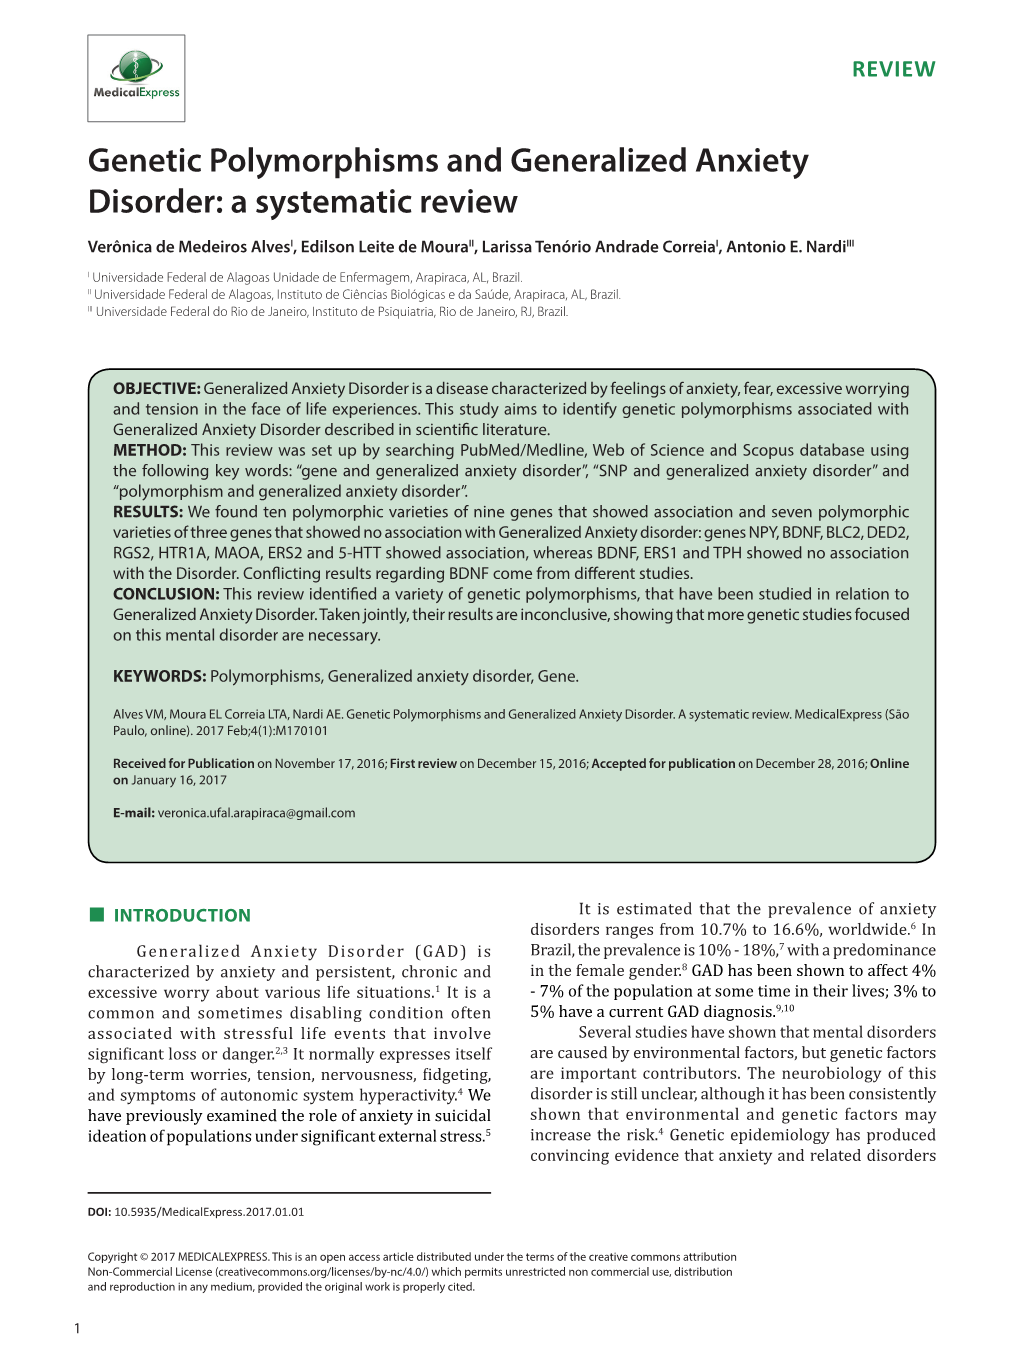 Genetic Polymorphisms and Generalized Anxiety Disorder: a Systematic Review